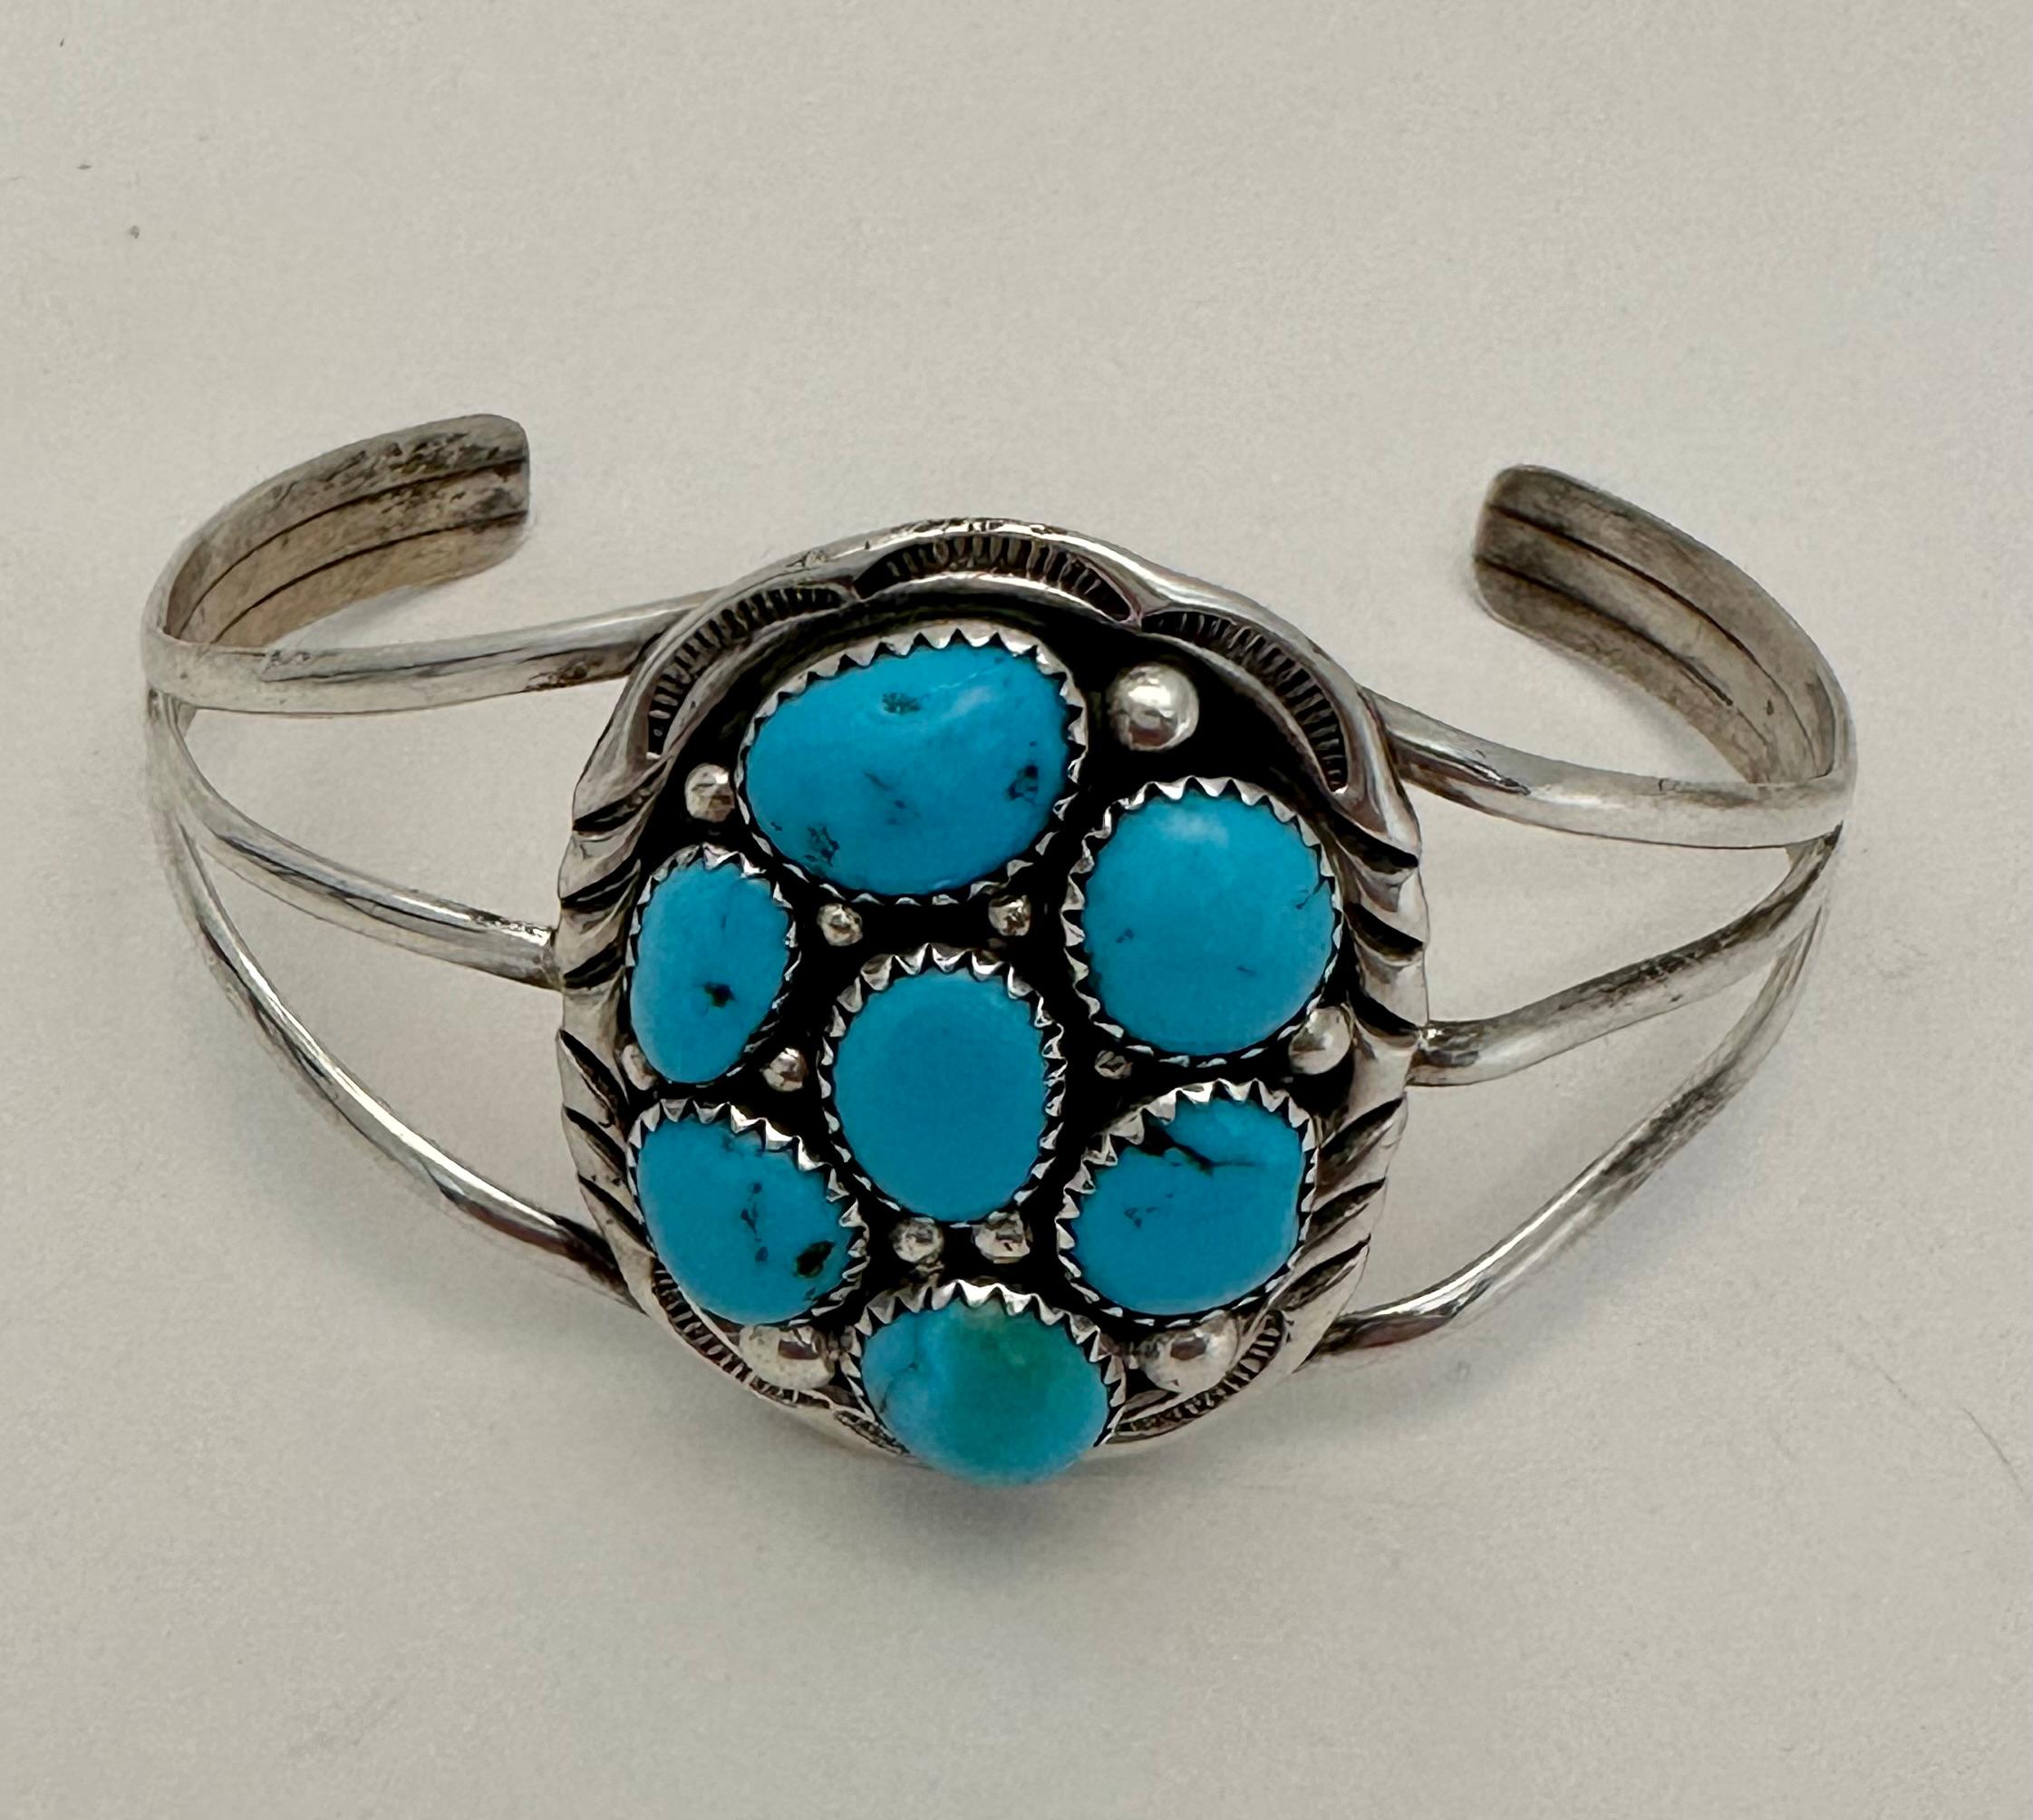 Vintage Sterling Silver .925 Handmade Navajo Sleeping Beauty Turquoise Bracelet In Excellent Condition For Sale In Las Vegas, NV